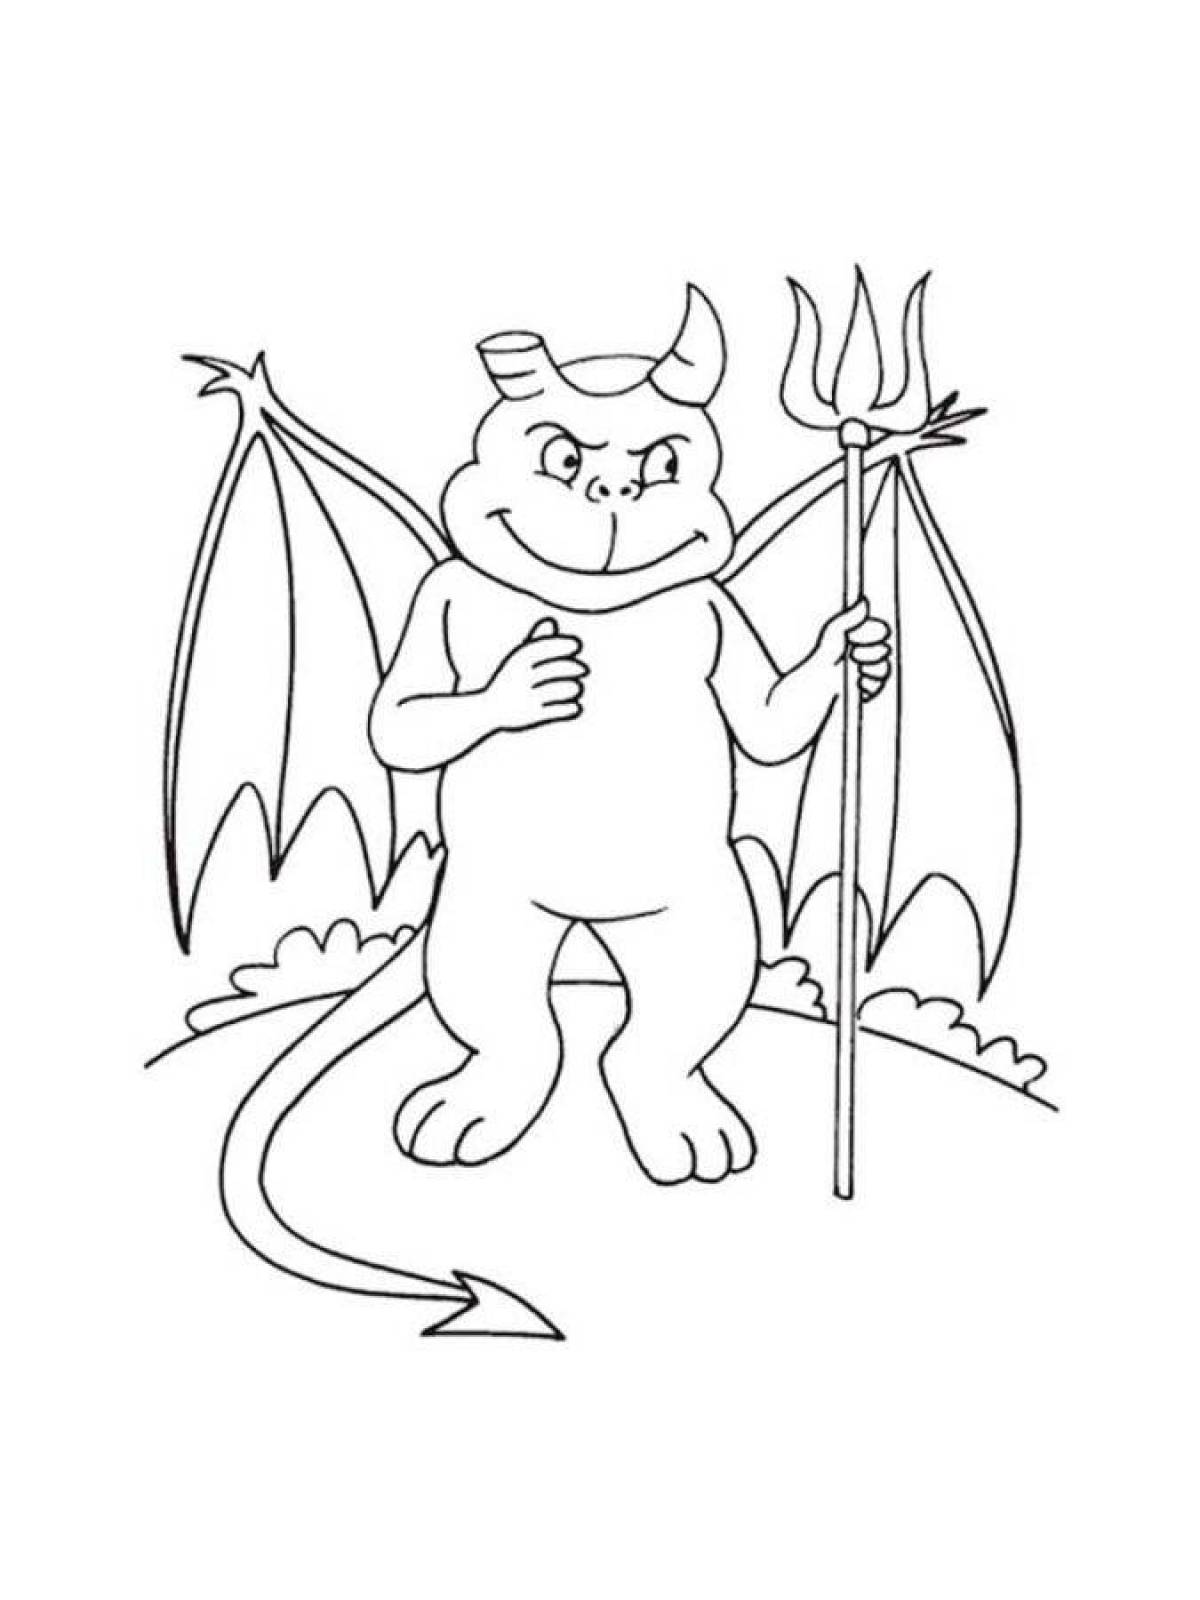 Glorious demon coloring page